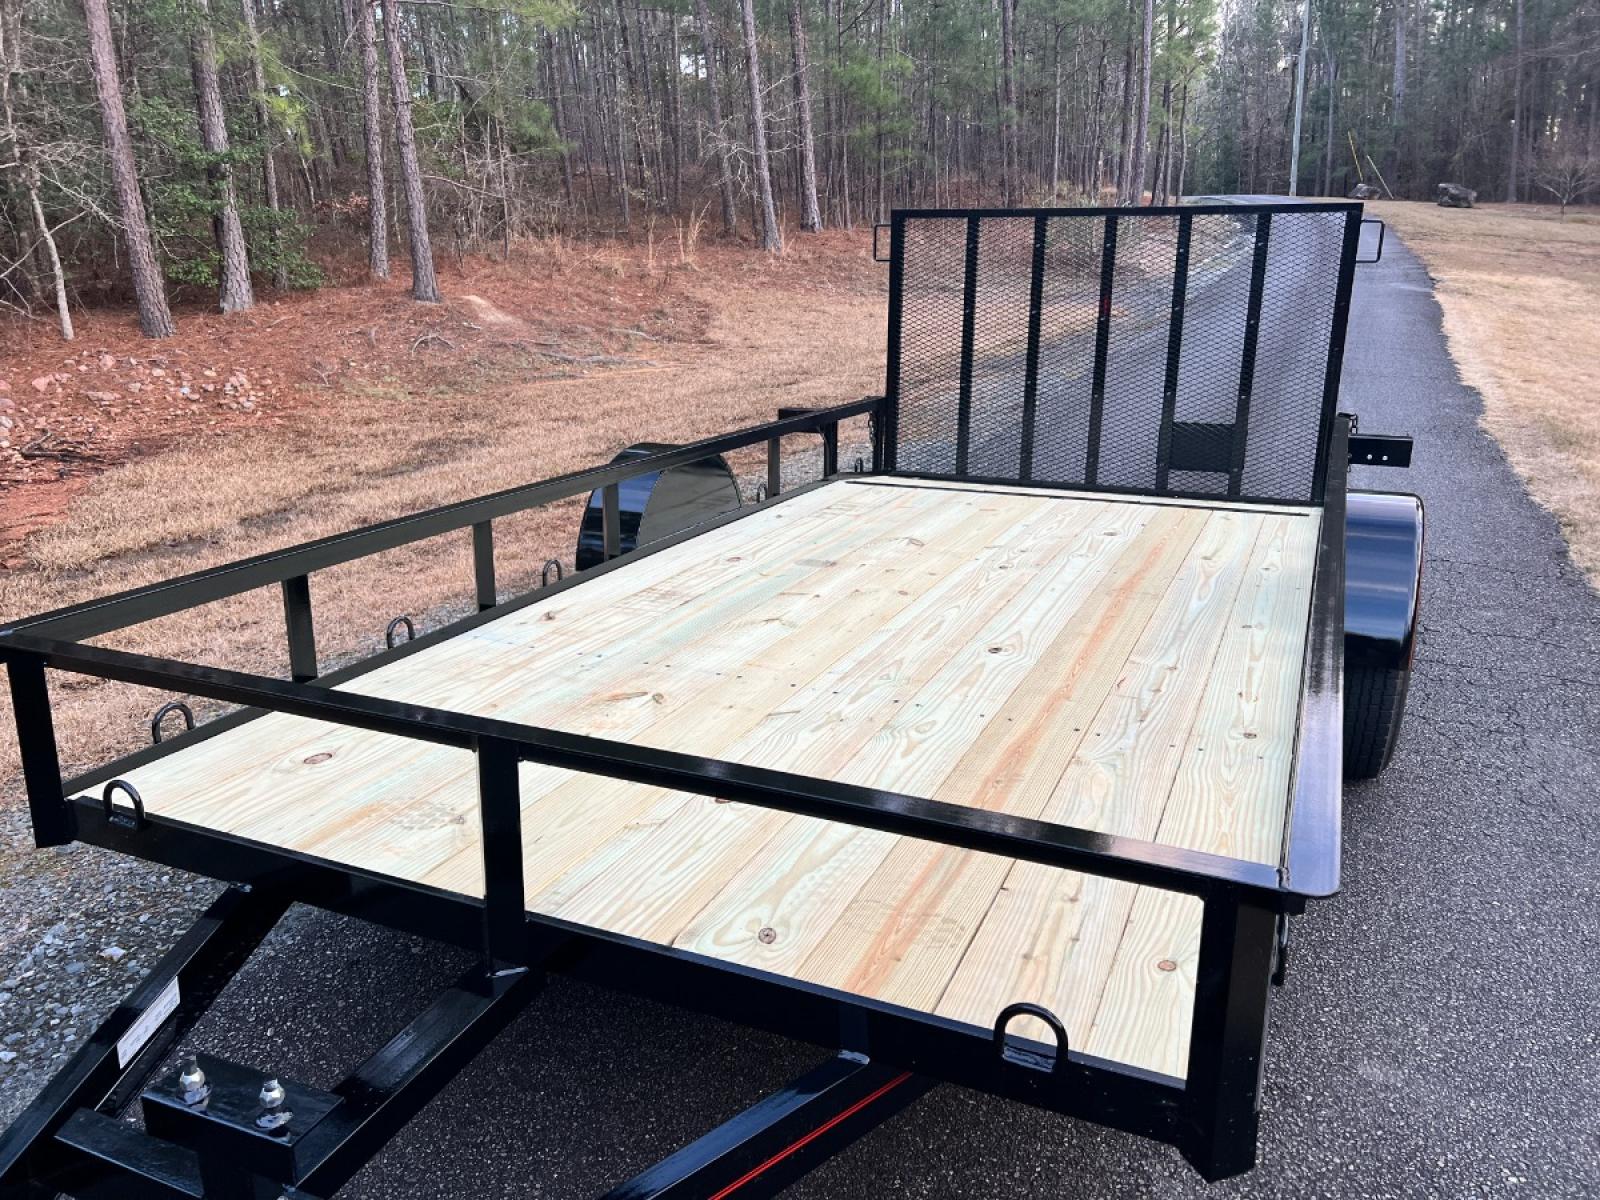 2023 Black Macon Custom Trailers 6.5ft X 14ft Utility , located at 1330 Rainey Rd., Macon, 31220, (478) 960-1044, 32.845638, -83.778687 - 6ft 6" Wide X 14ft Long Utility Trailer is Really Loaded Out! 24" Beavertail Floor at the Rear, Makes it Easy to Load! Haul Lawn Tractor, Lawn Mowers, Landscaping Equipment, Water Tanks, ATV's, Etc. 3,500 lb Axle, 7 Pin Connector Heavy Duty with 2" X 3" Angle Iron Floor Joists! Most Companies - Photo #6